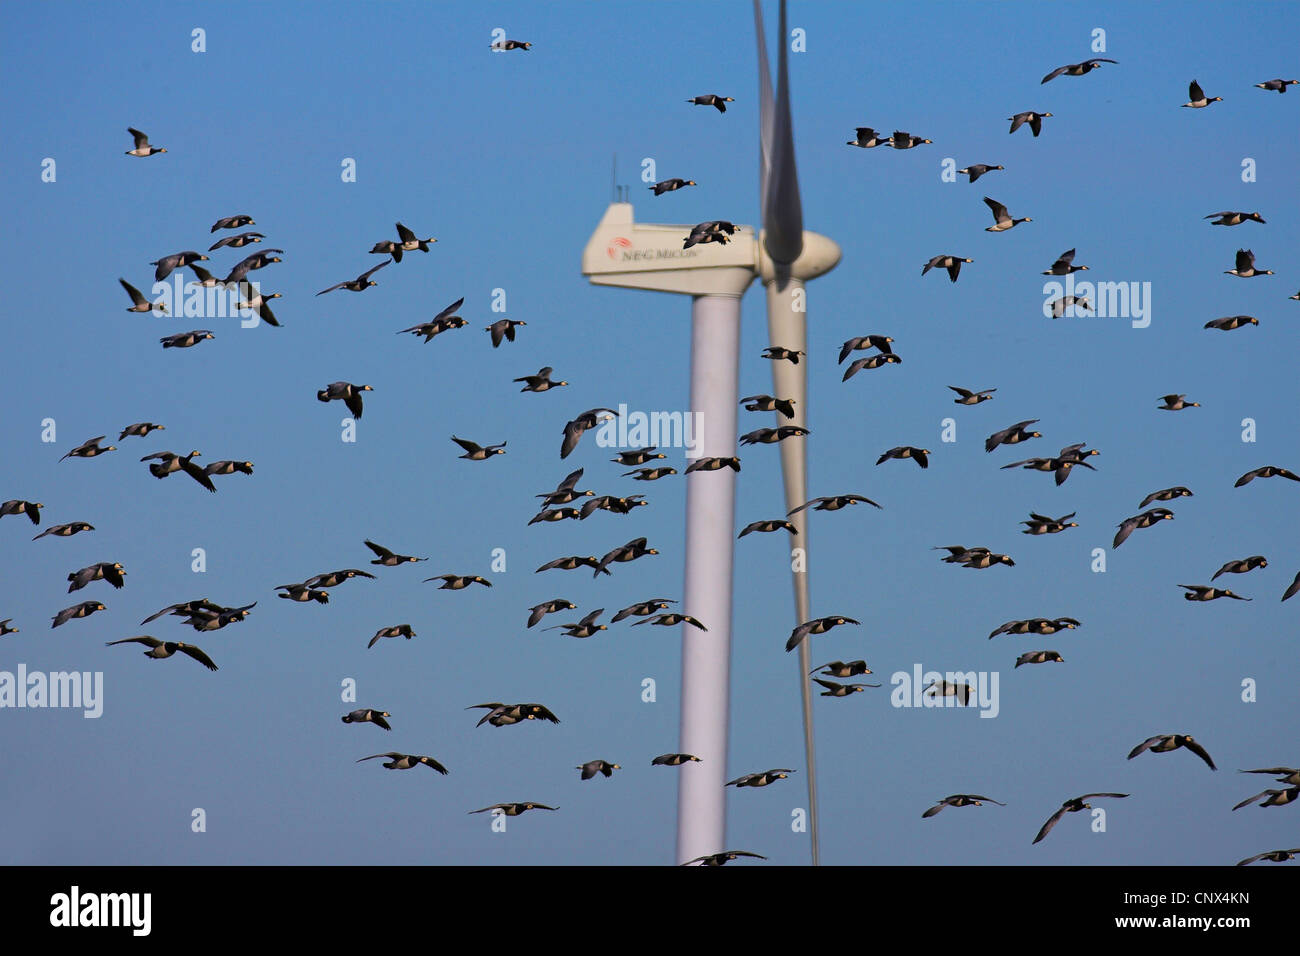 barnacle goose (Branta leucopsis), flock flying in front of a wind wheel, Netherlands, Frisia Stock Photo